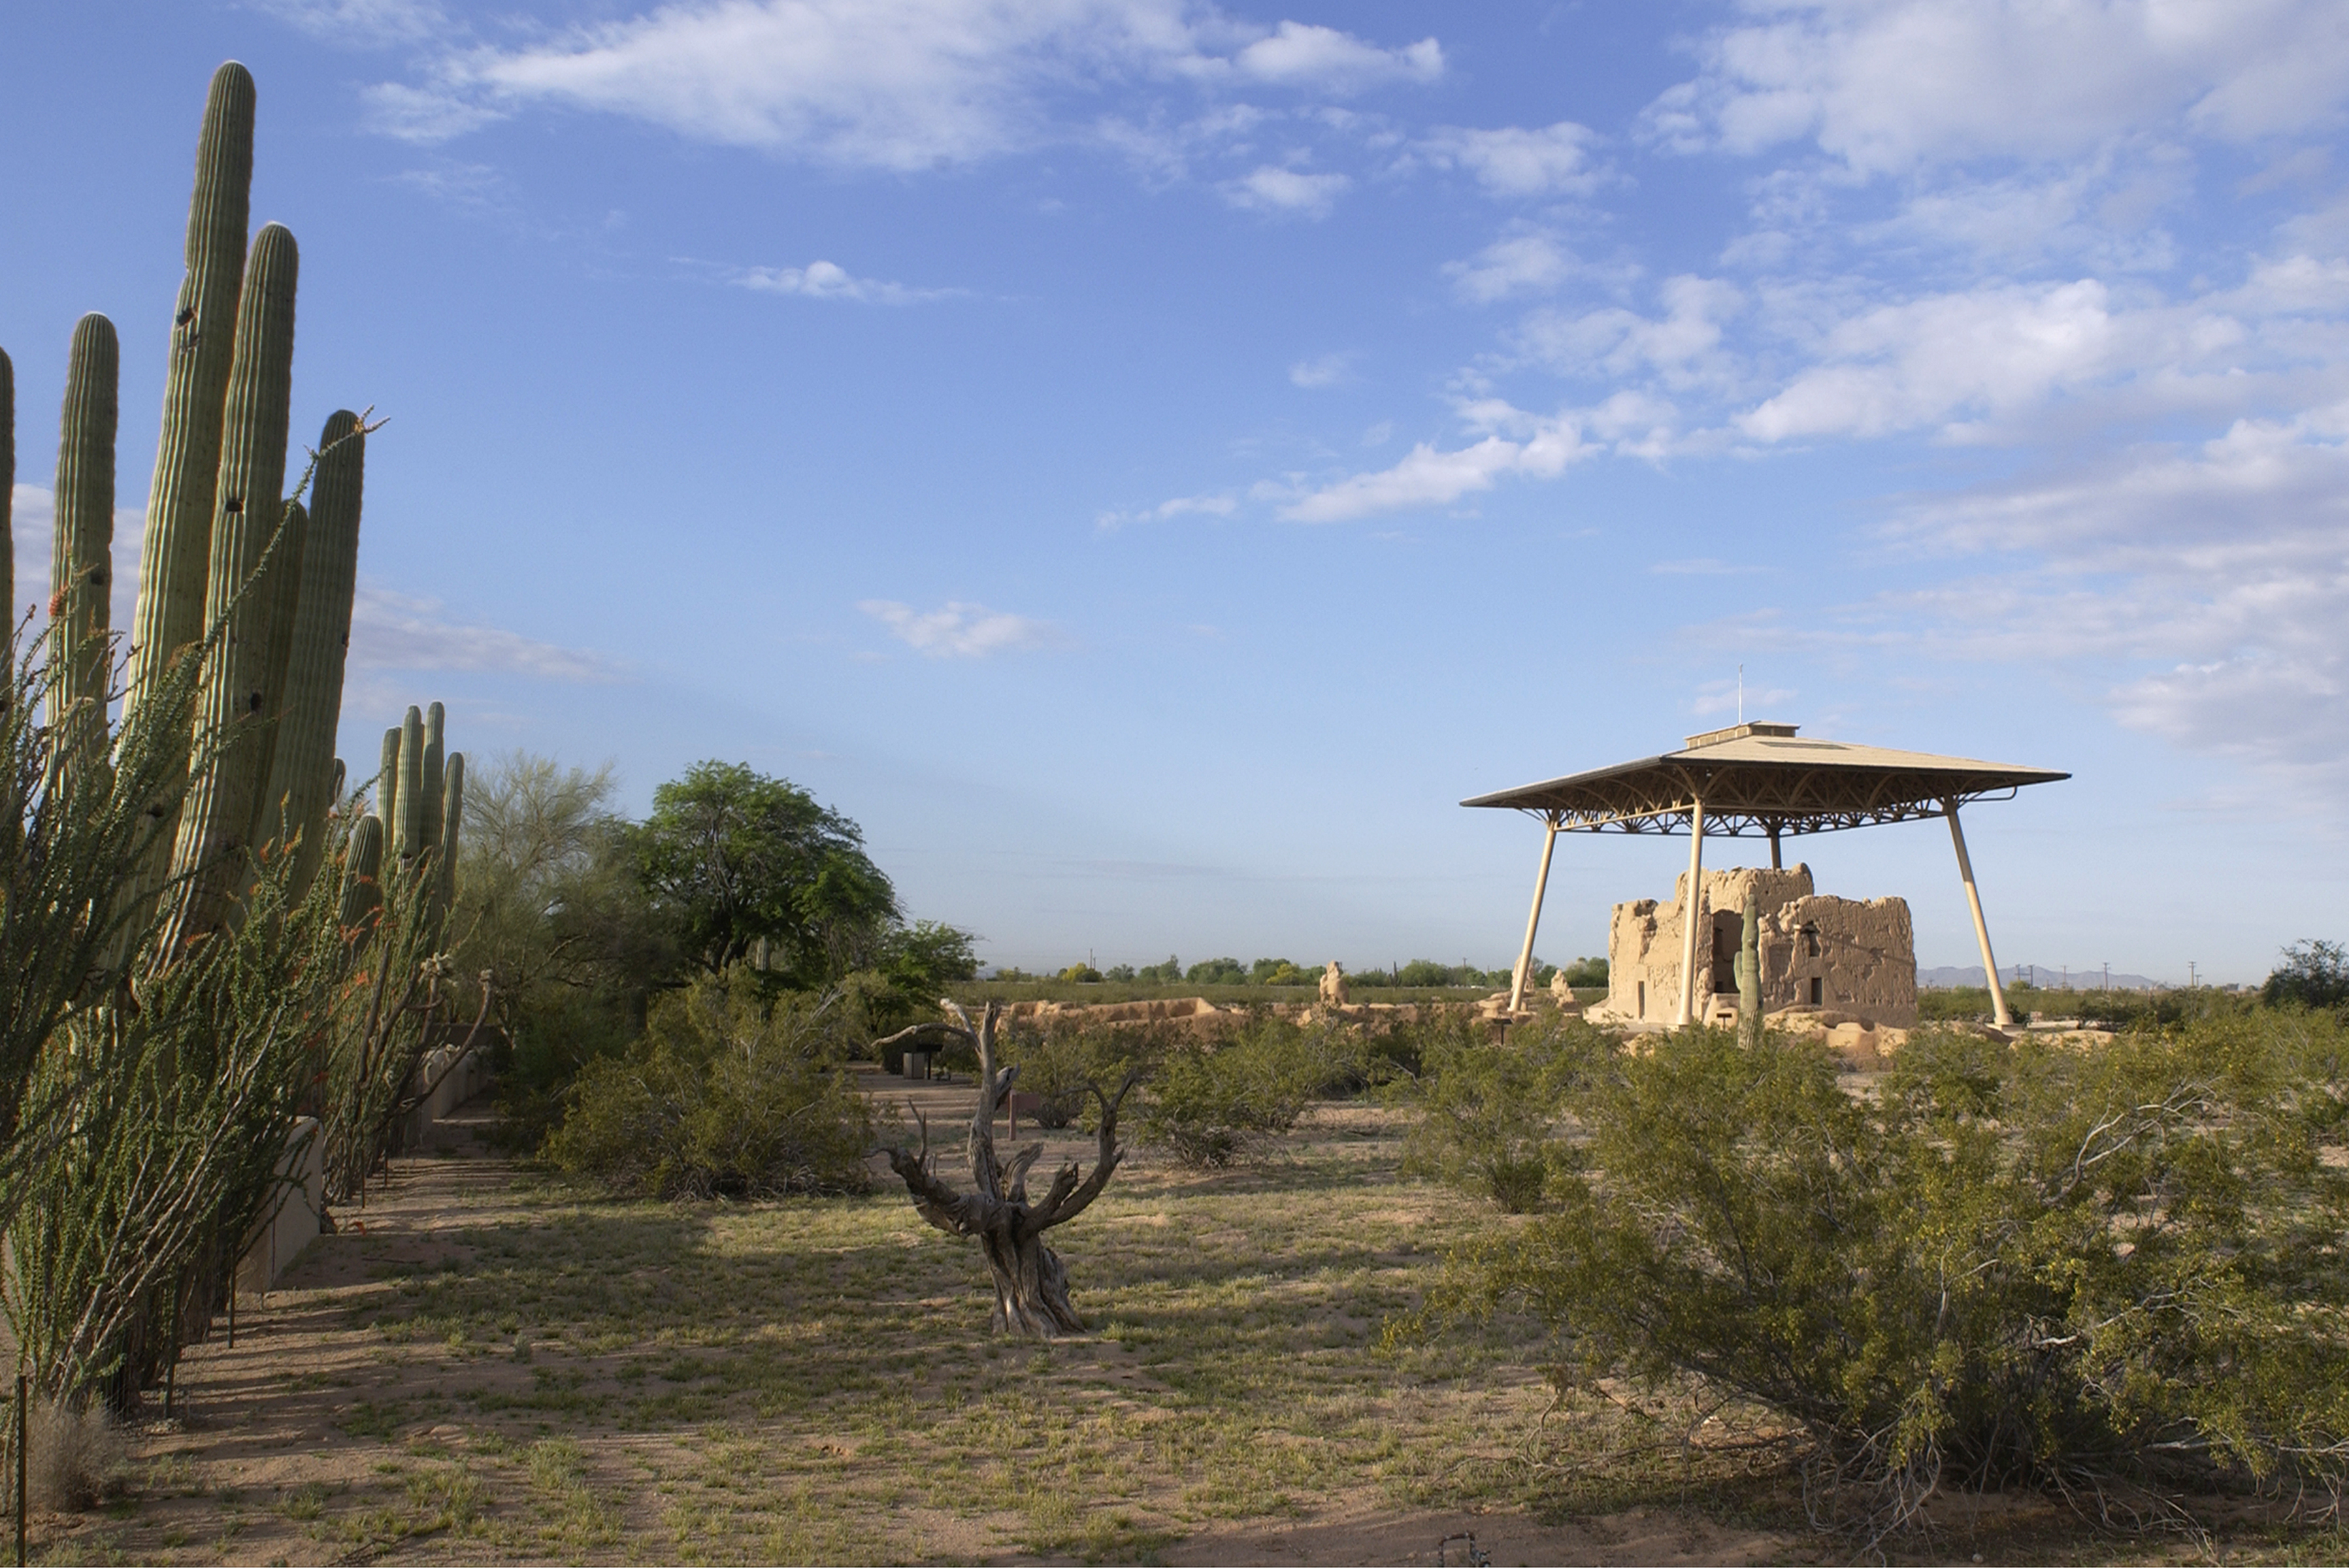 earthern Great House standing out in the Sonoran Desert plants